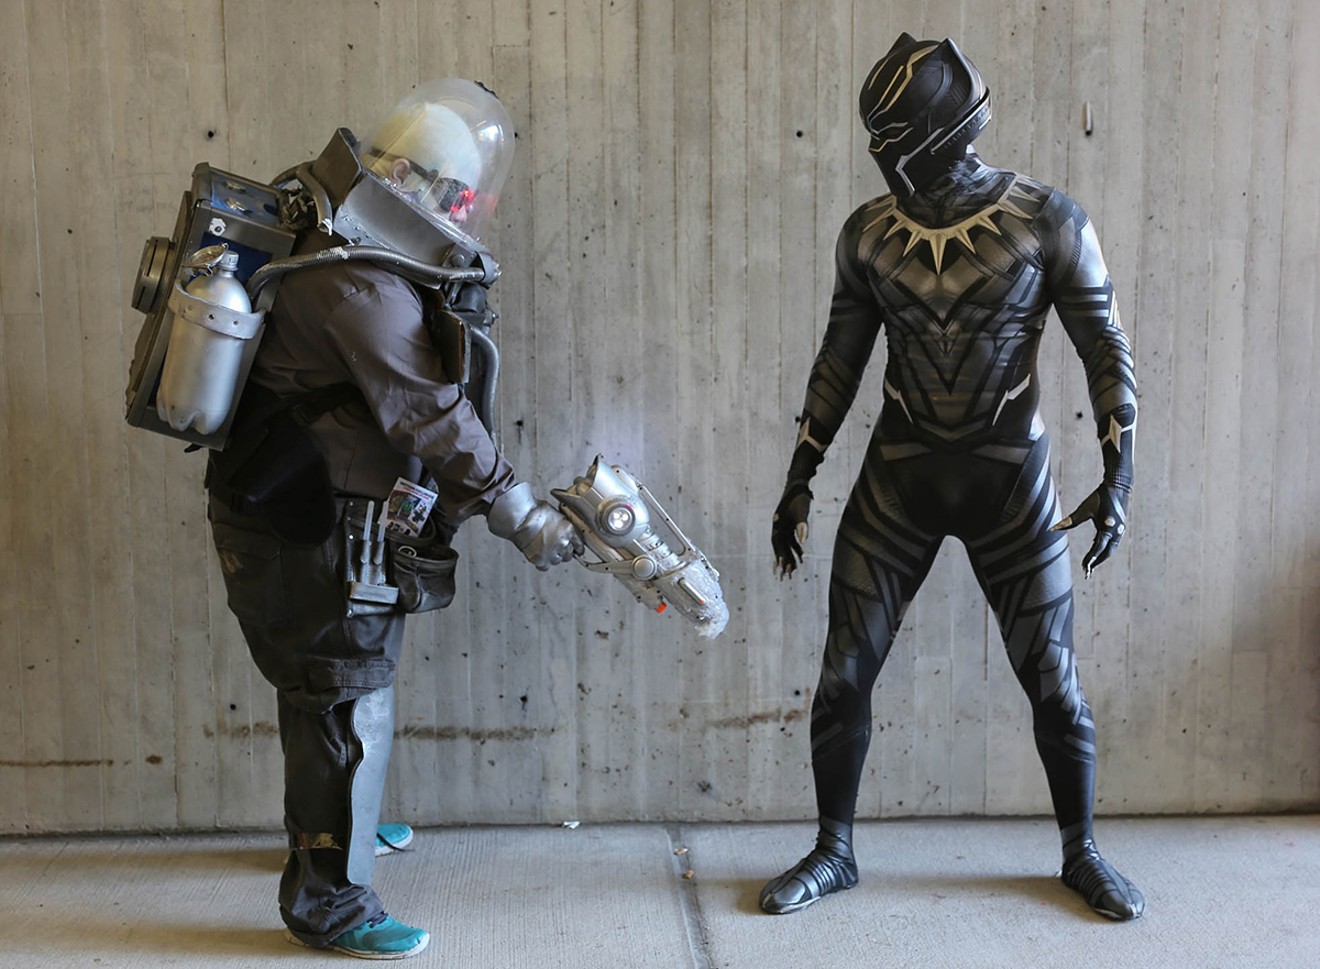 Whether you're feeling all Mr. Freeze or Black Panther, there are plenty of ways to get your cosplay on Easter weekend.